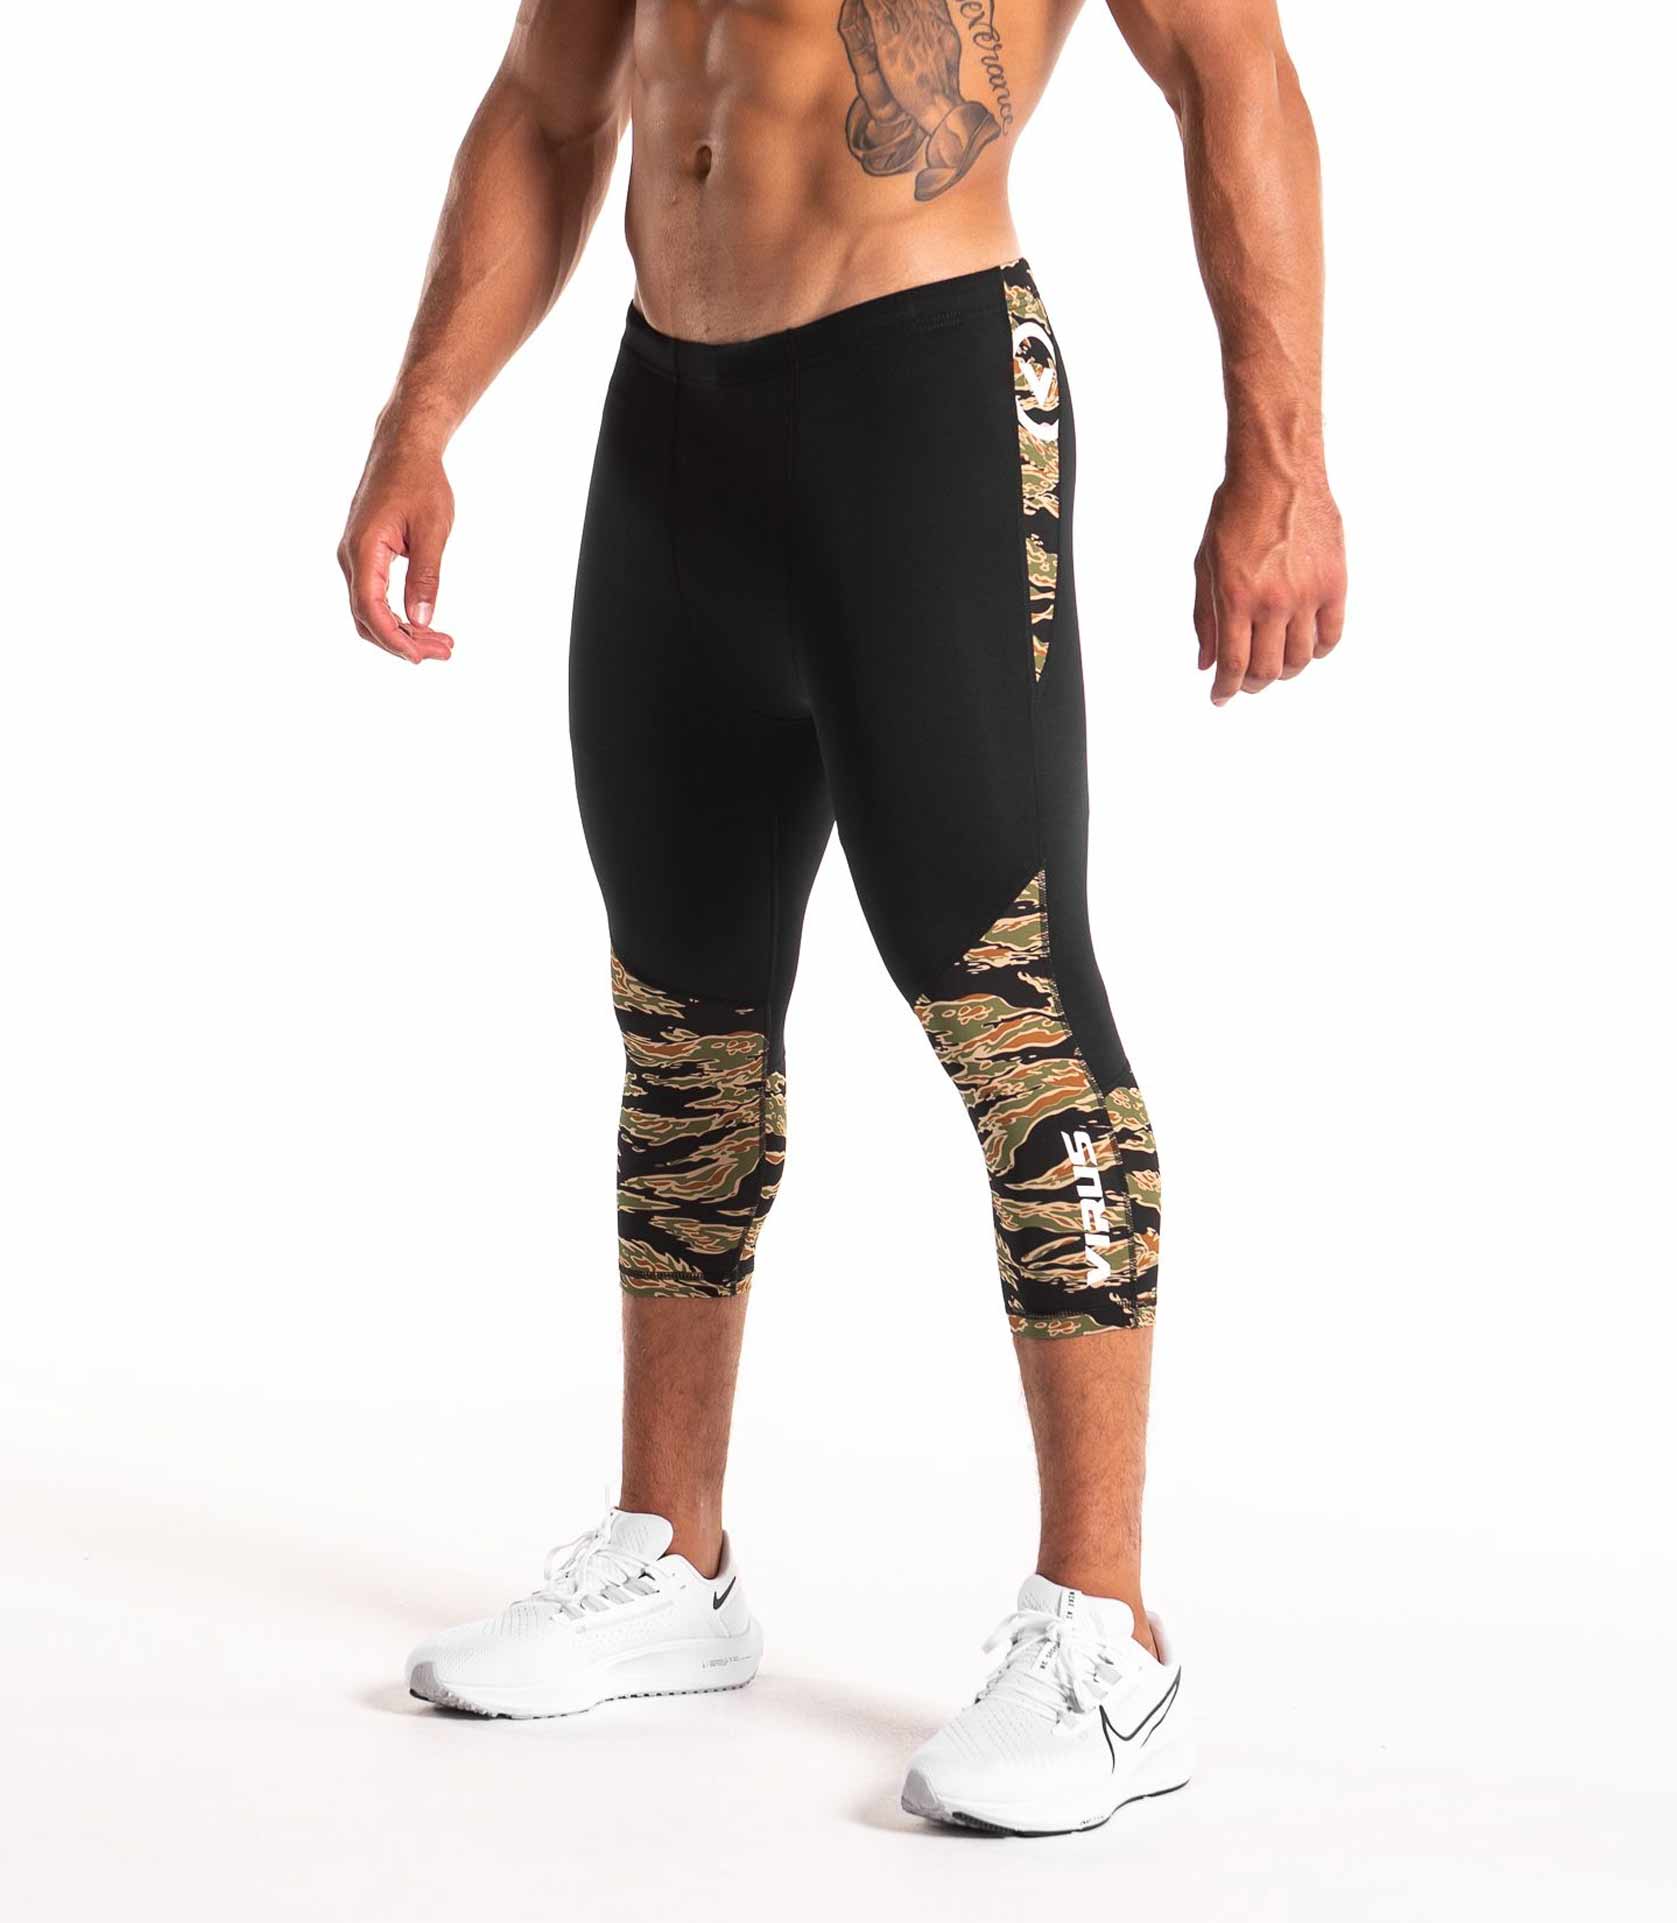 ALL NEW  Men's CoolJade Racer 3/4 Length Compression Tech Pant